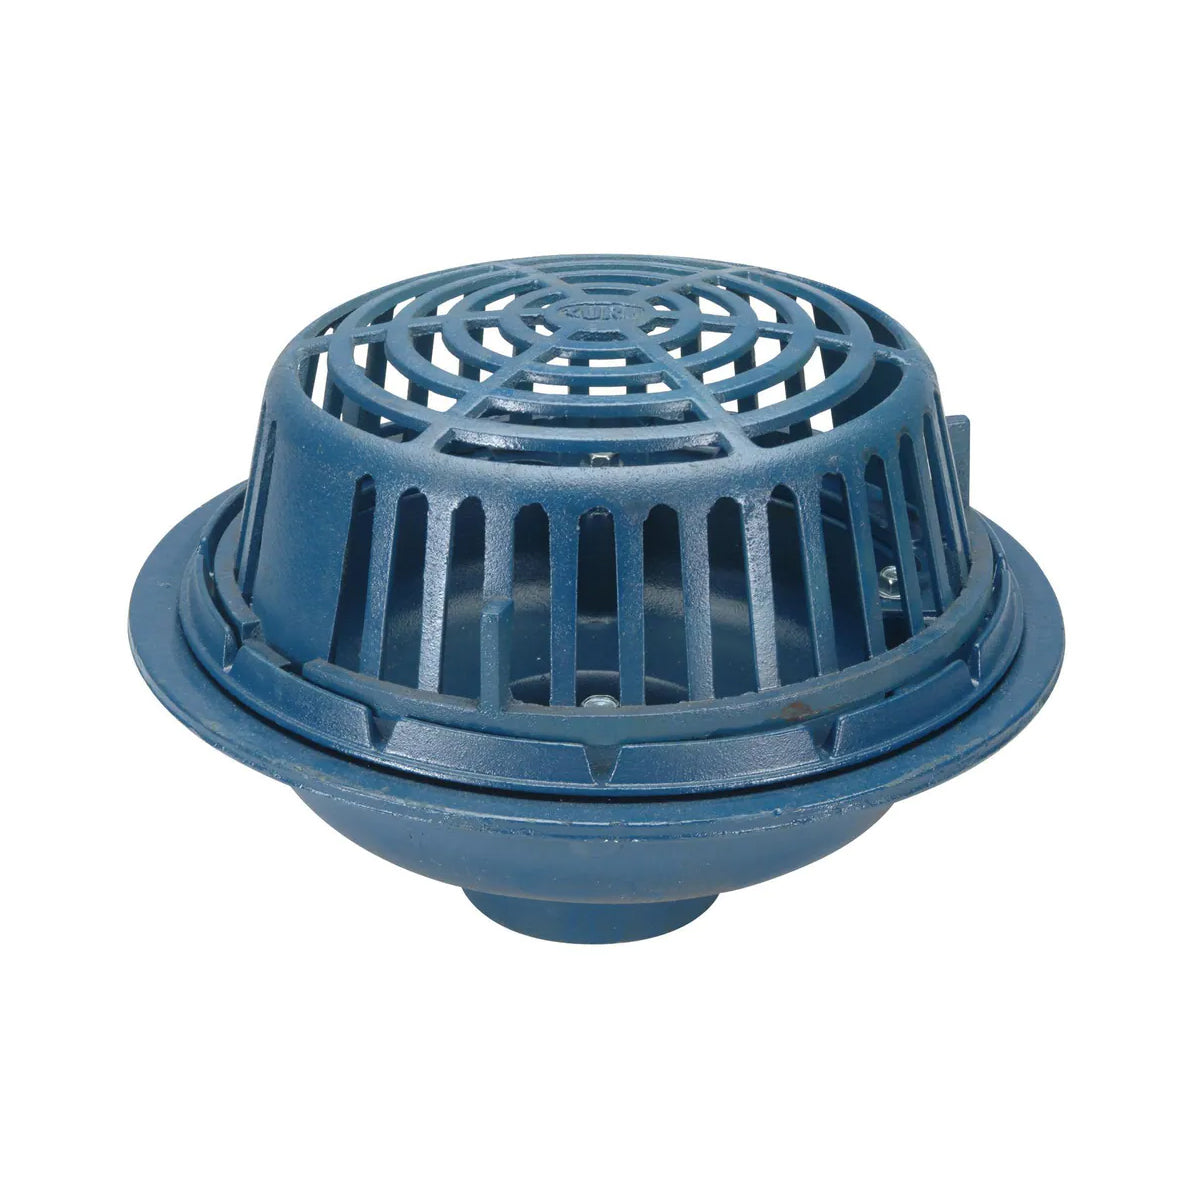 Z100-2NH - 15" Diameter Cast Iron Roof Drain, 2" Pipe Size - Body Only